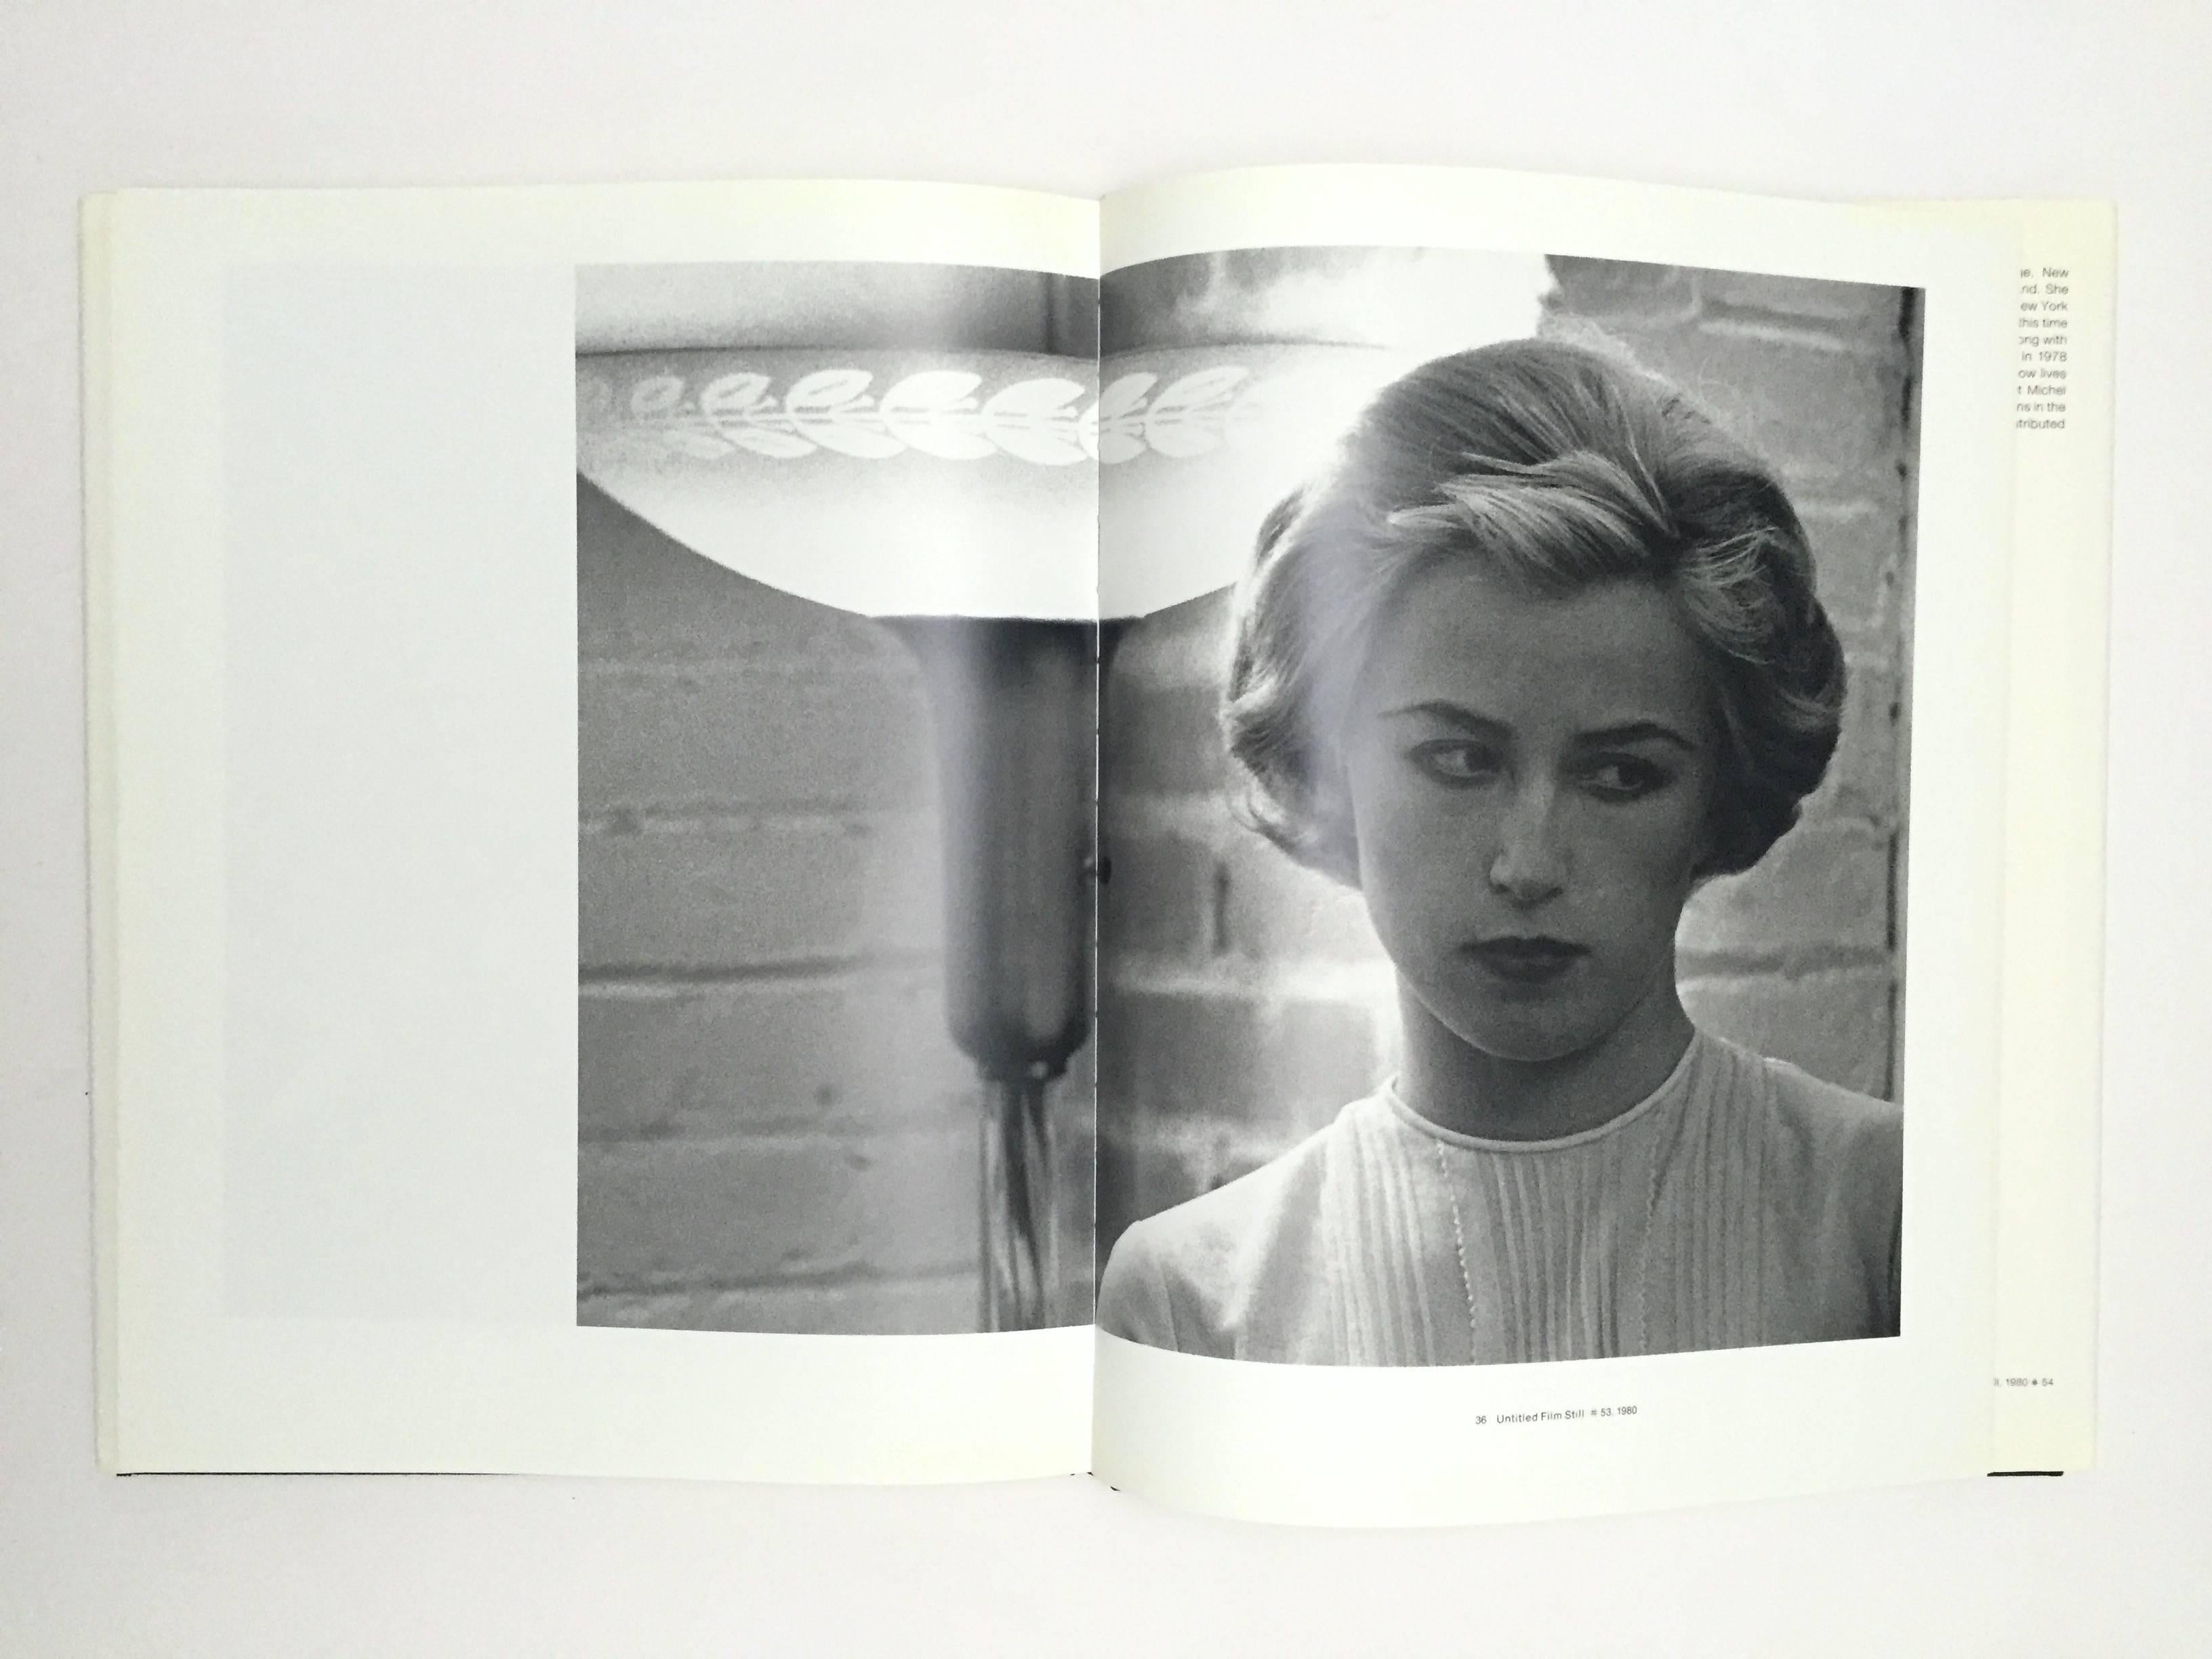 First edition, Jonathan Cape, 1990.

A monograph of Cindy Sherman's iconic early work, the 'Untitled Film Stills' series of 40 photographs, made between 1977-1980. These early staged images reference the editorials, films and imagery seen in the